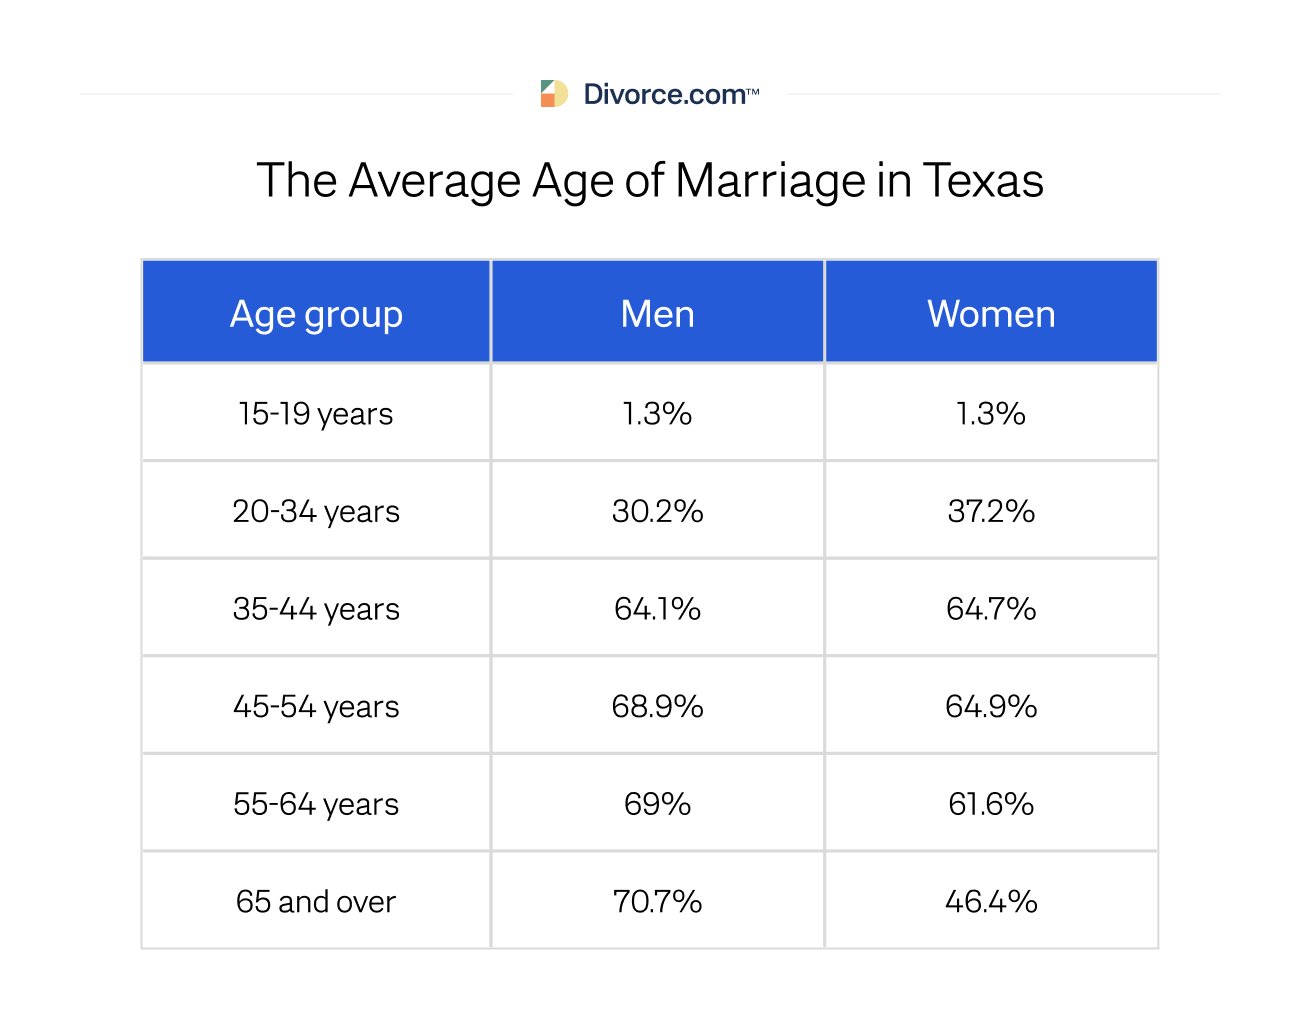 The average age of marriage in Texas